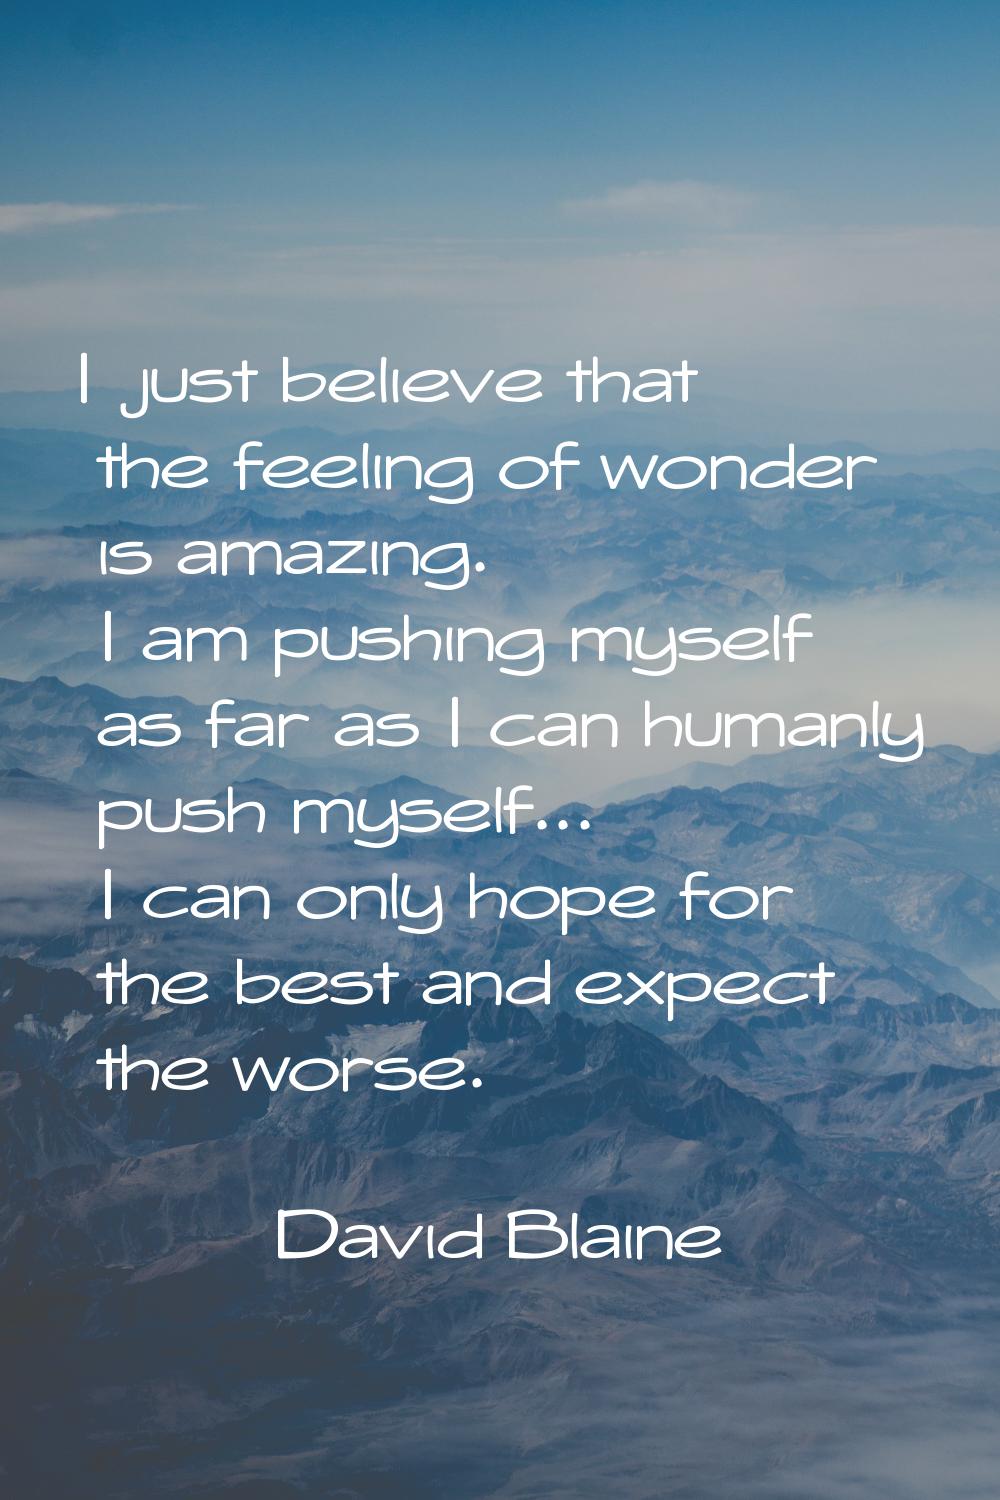 I just believe that the feeling of wonder is amazing. I am pushing myself as far as I can humanly p